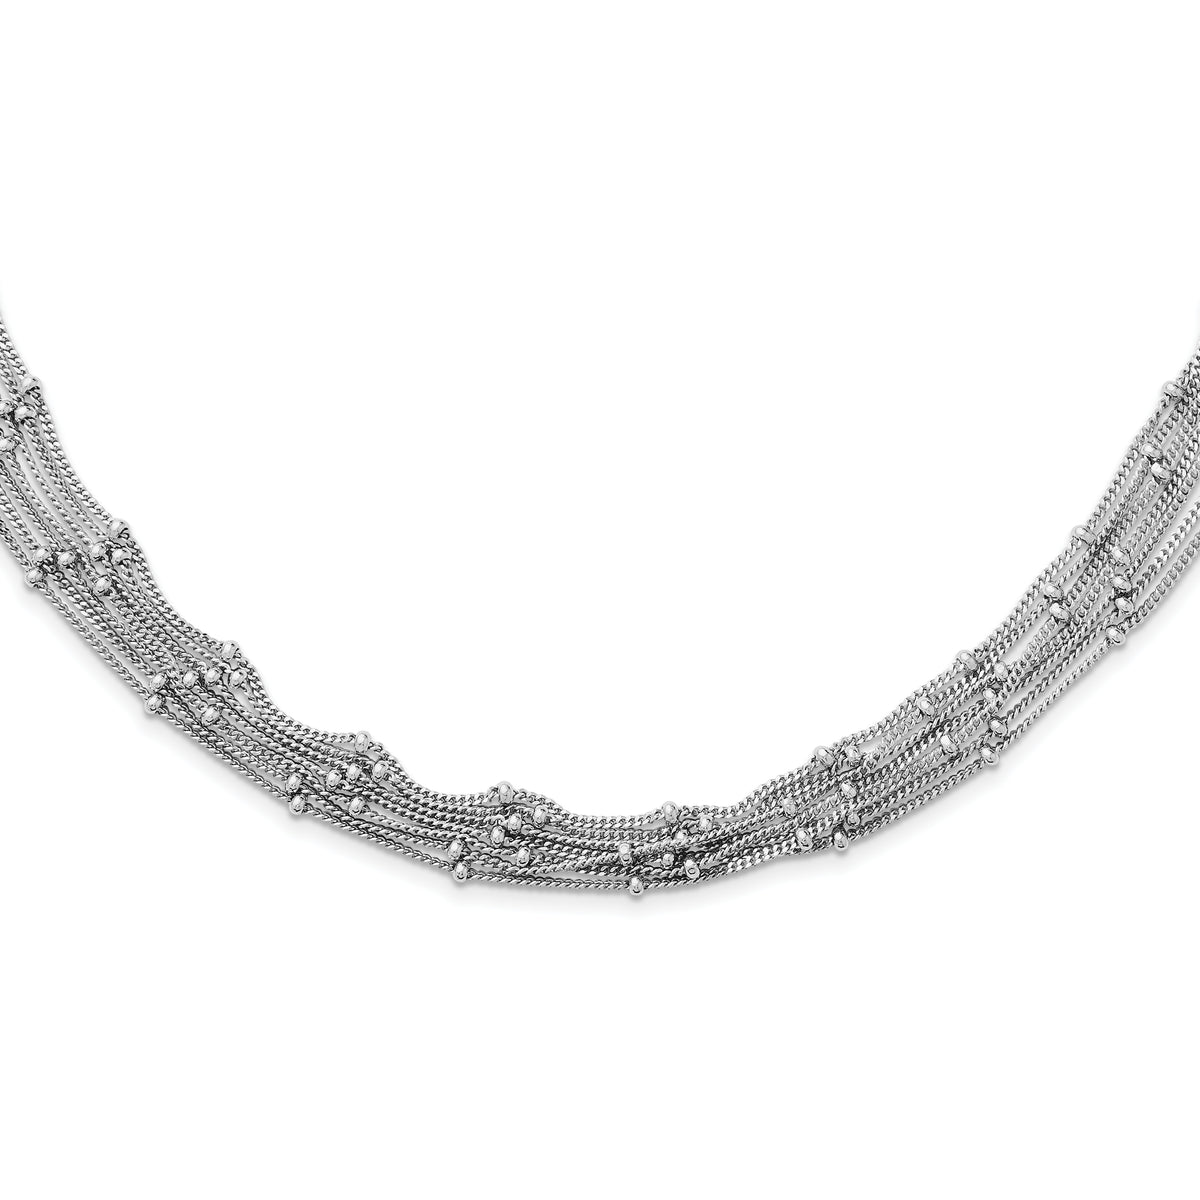 Sterling Silver Seven Strand Beaded Necklace